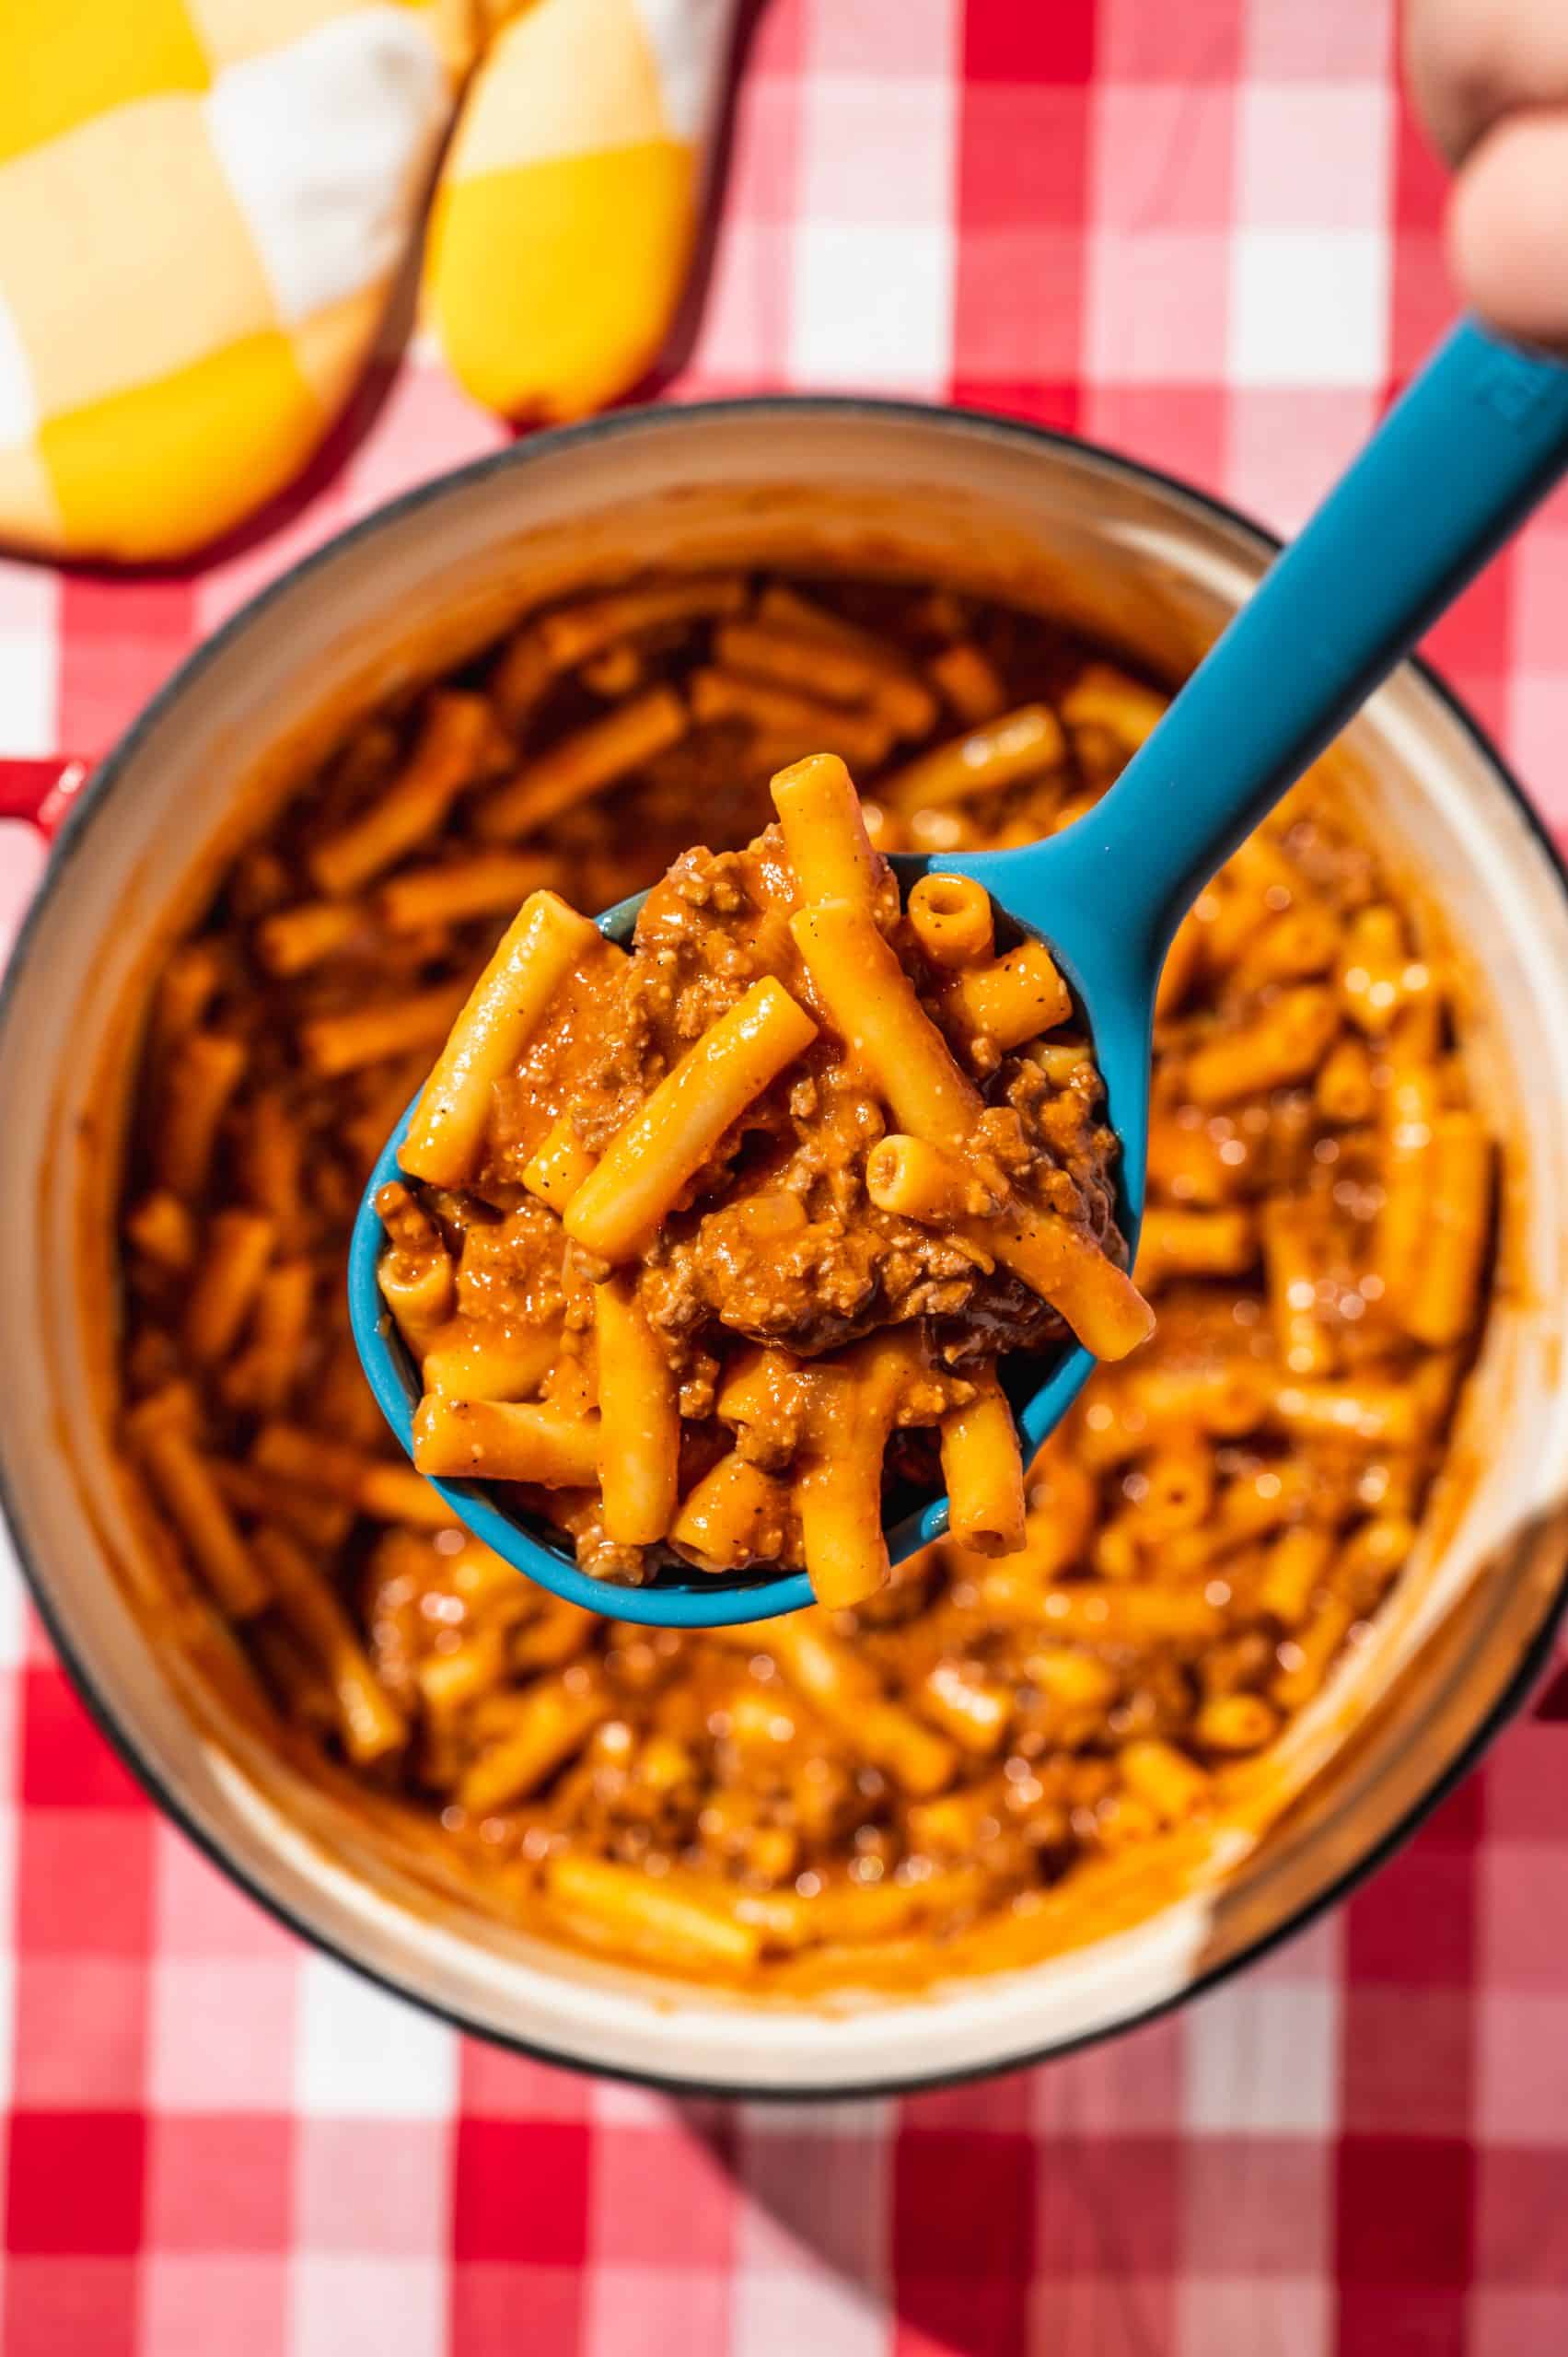 blue ladle filled with homemade beefaroni held over a pot